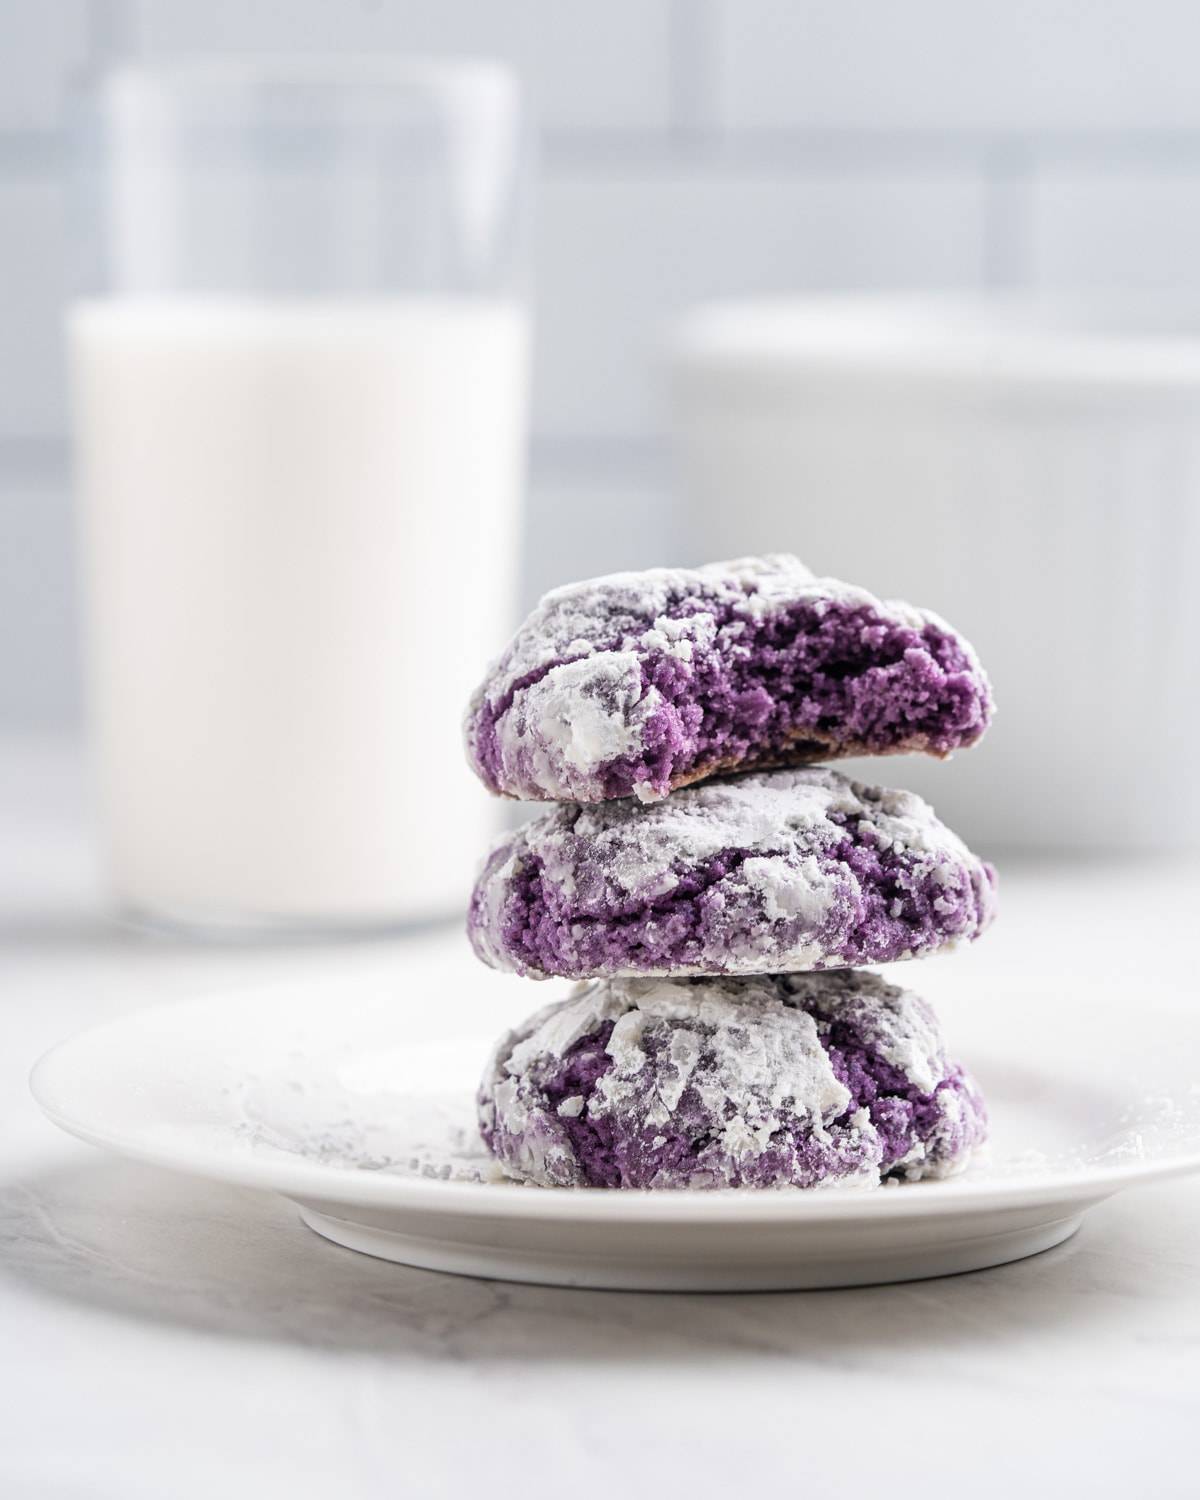 A stack of unique purple powdered sugar cookies on a plate next to a glass of milk.